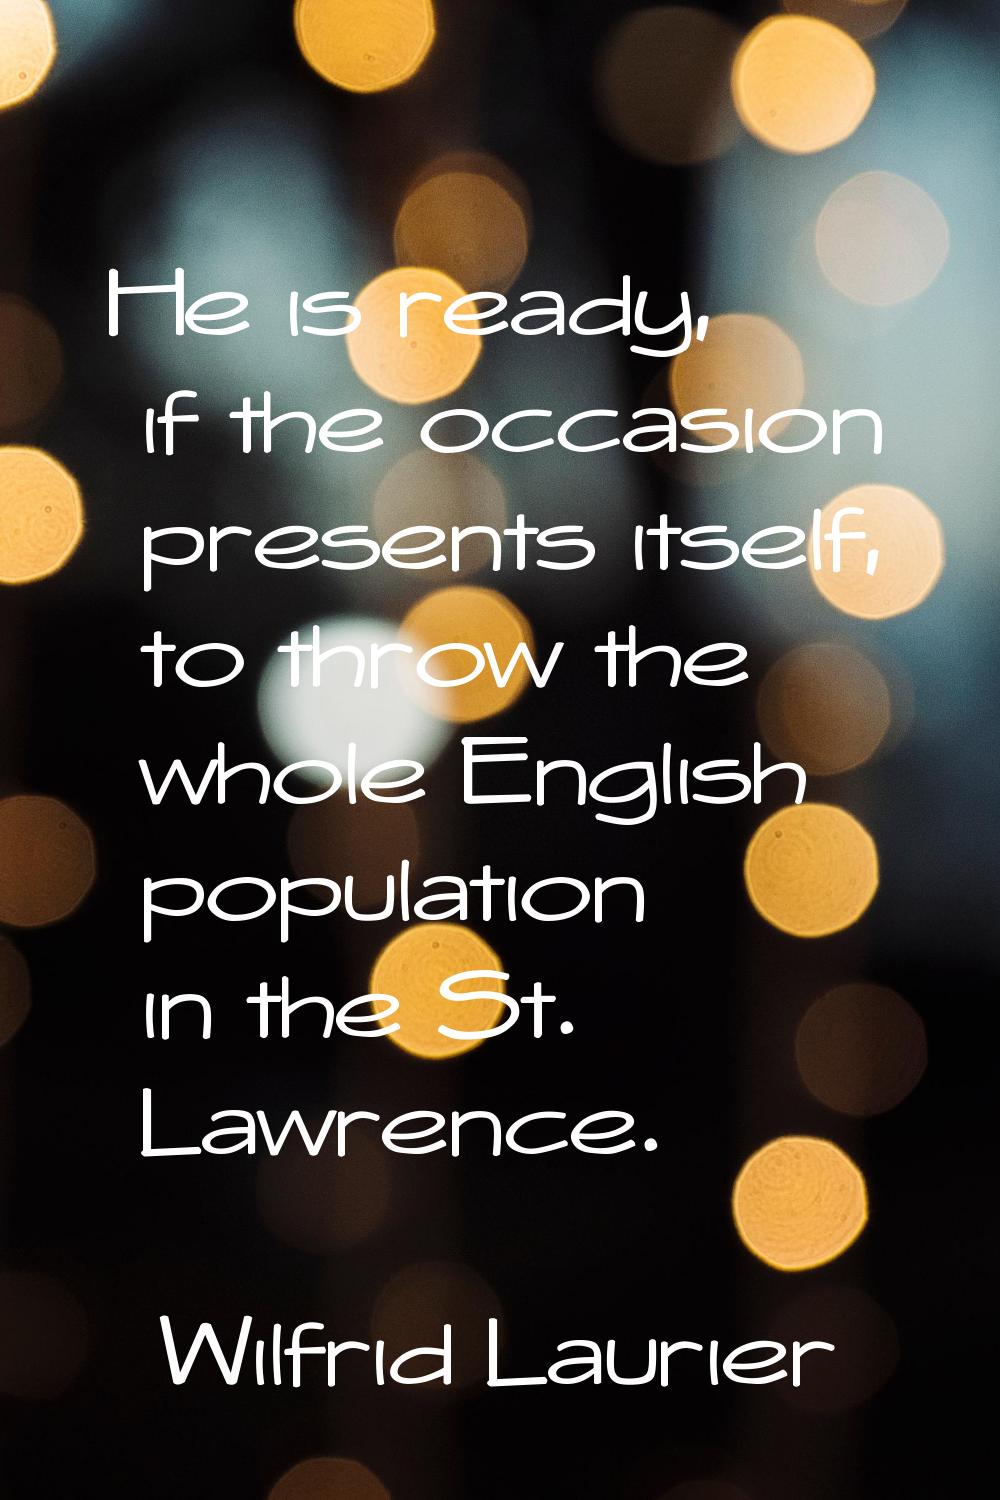 He is ready, if the occasion presents itself, to throw the whole English population in the St. Lawr